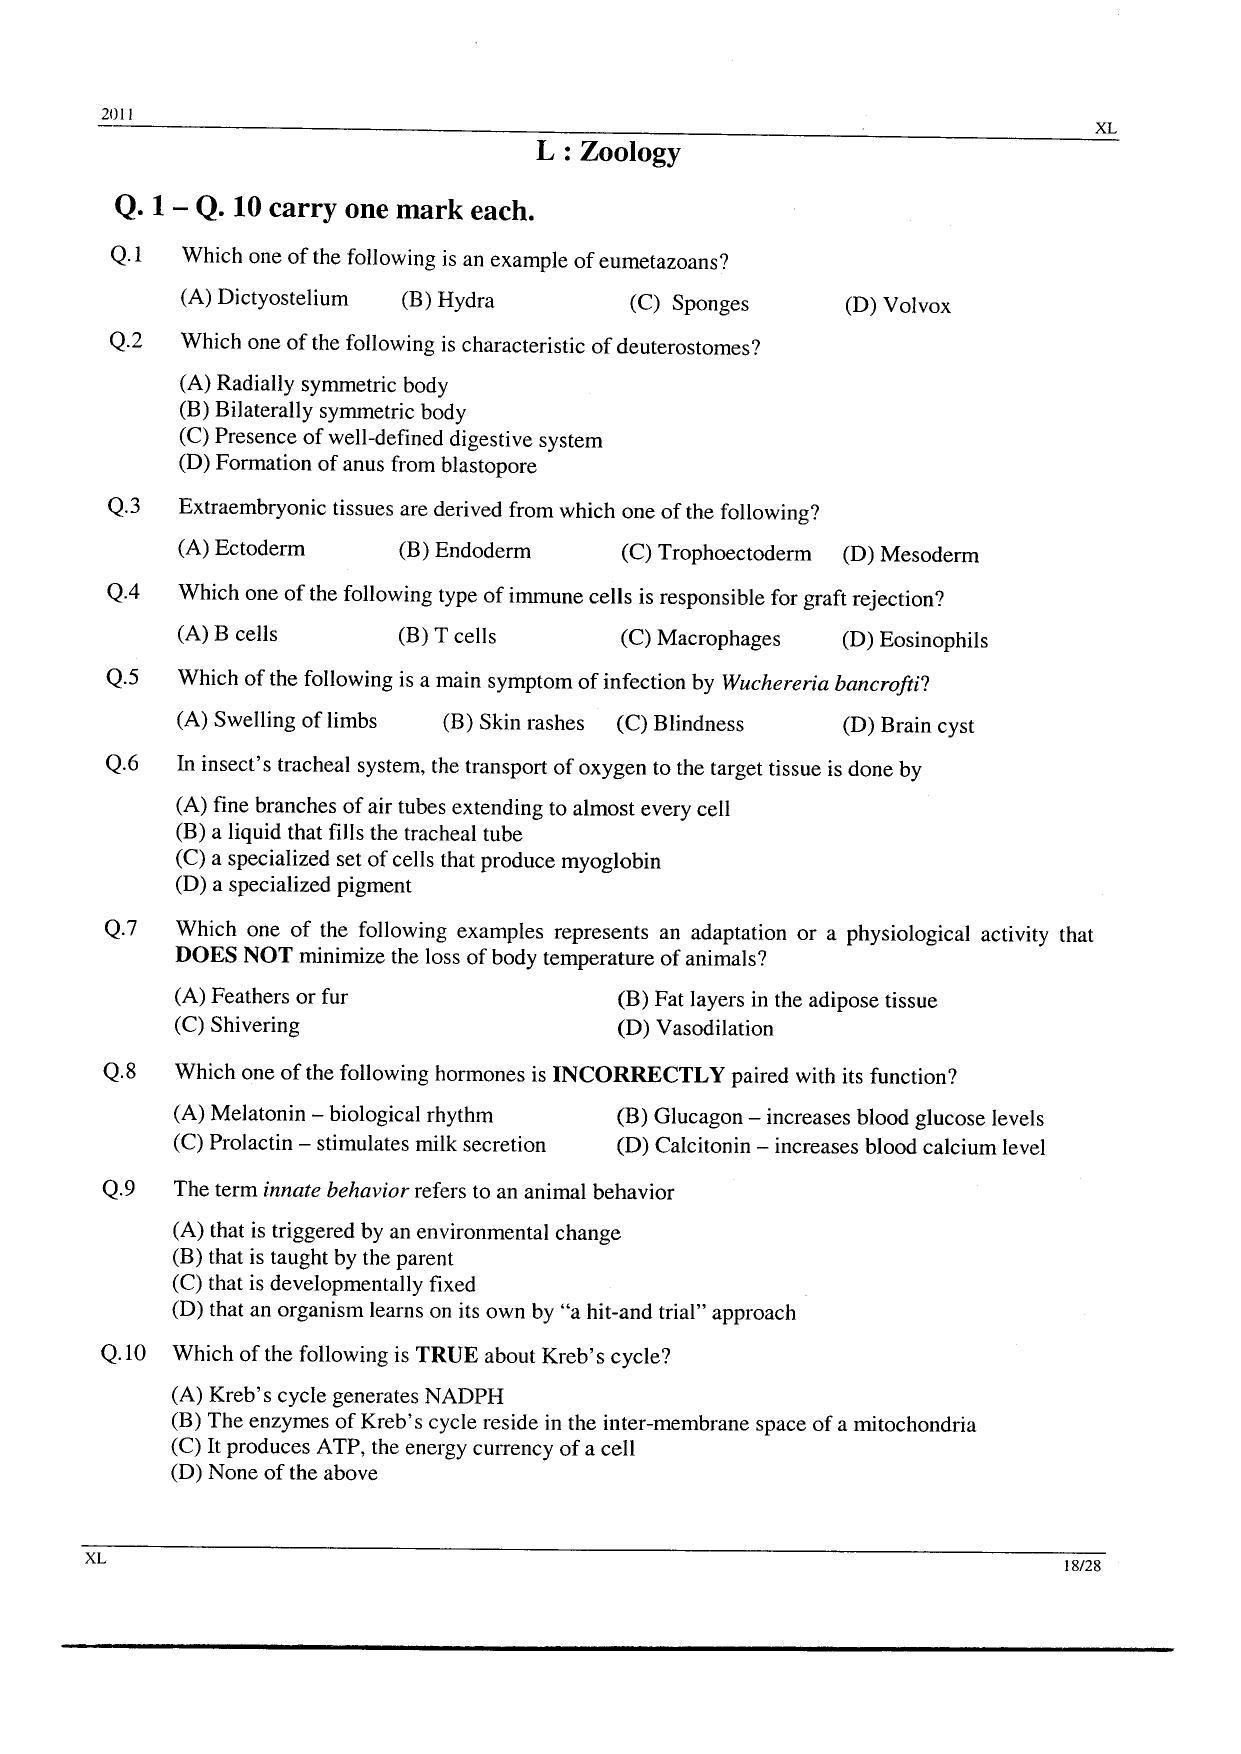 GATE 2011 Life Sciences (XL) Question Paper with Answer Key - Page 18